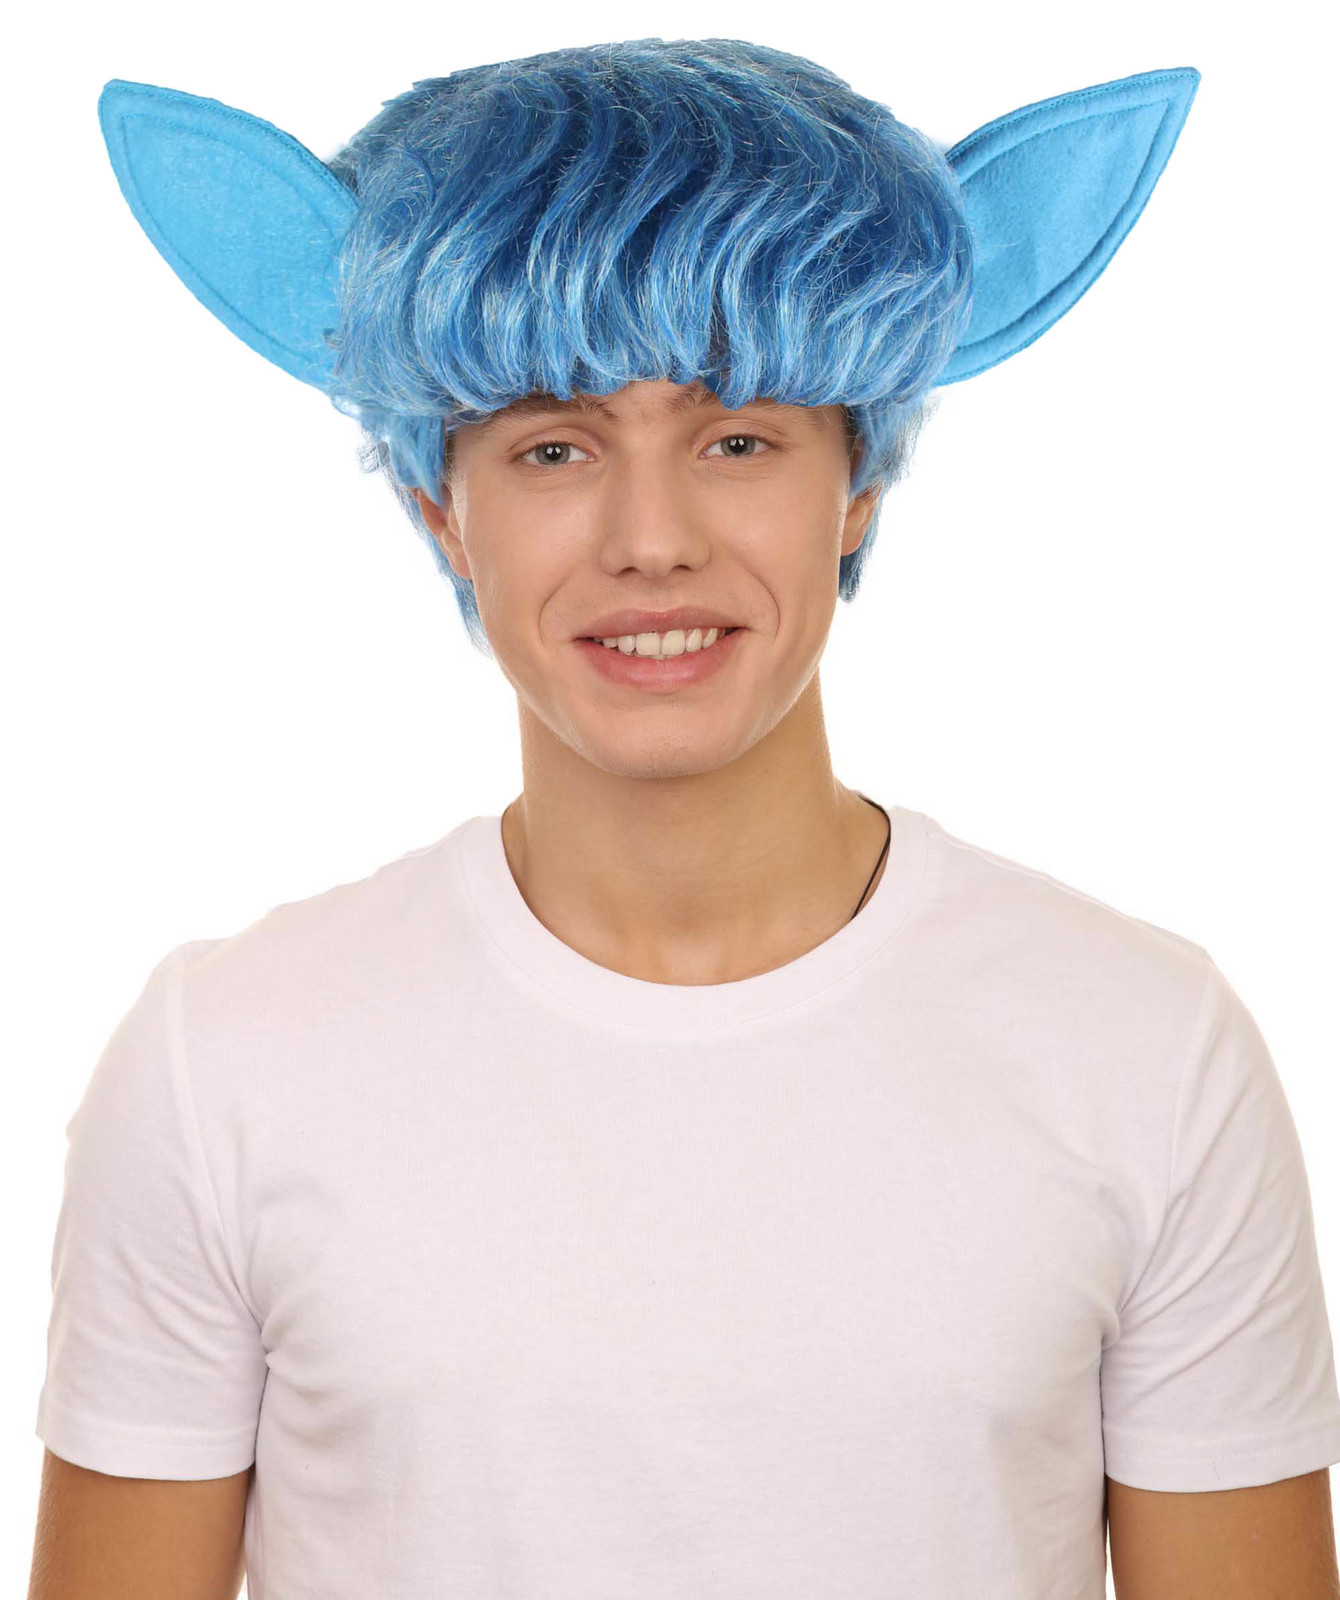 Men's 9 Inch Short Length Halloween Cosplay Animated Elf Blue Wig with Ears